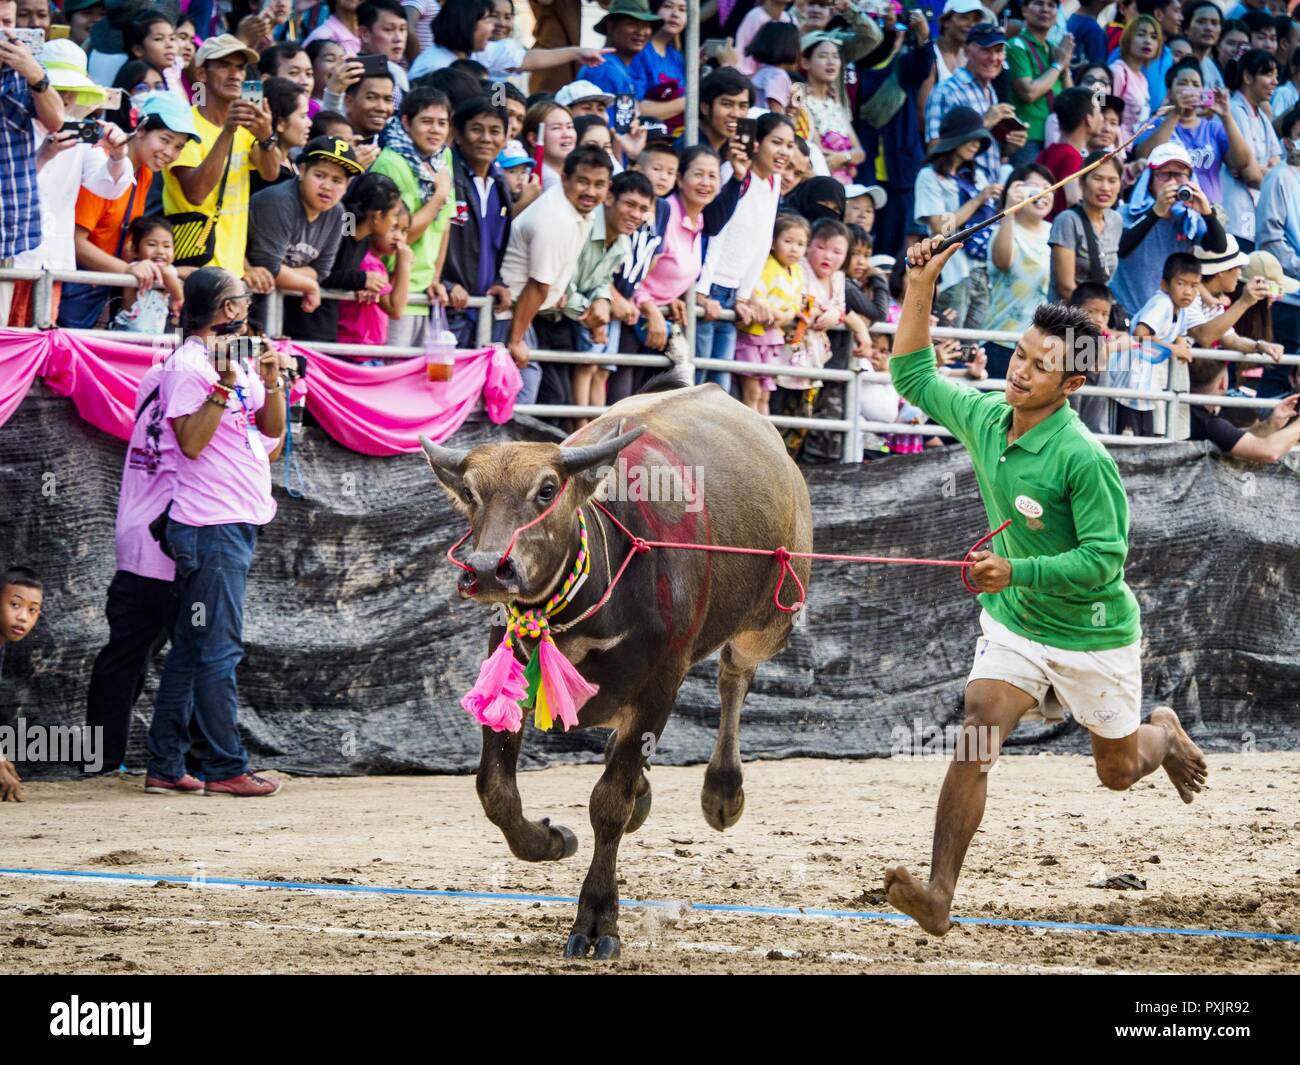 October 23, 2018 - Chonburi, Chonburi, Thailand - A jockey whips his water buffalo after dismounting in the buffalo races in Chonburi. Contestants race water buffalo about 100 meters down a muddy straight away. The buffalo races in Chonburi first took place in 1912 for Thai King Rama VI. Now the races have evolved into a festival that marks the end of Buddhist Lent and is held on the first full moon of the 11th lunar month (either October or November). Thousands of people come to Chonburi, about 90 minutes from Bangkok, for the races and carnival midway. (Credit Image: © Jack Kurtz/ZUMA Wire) Stock Photo